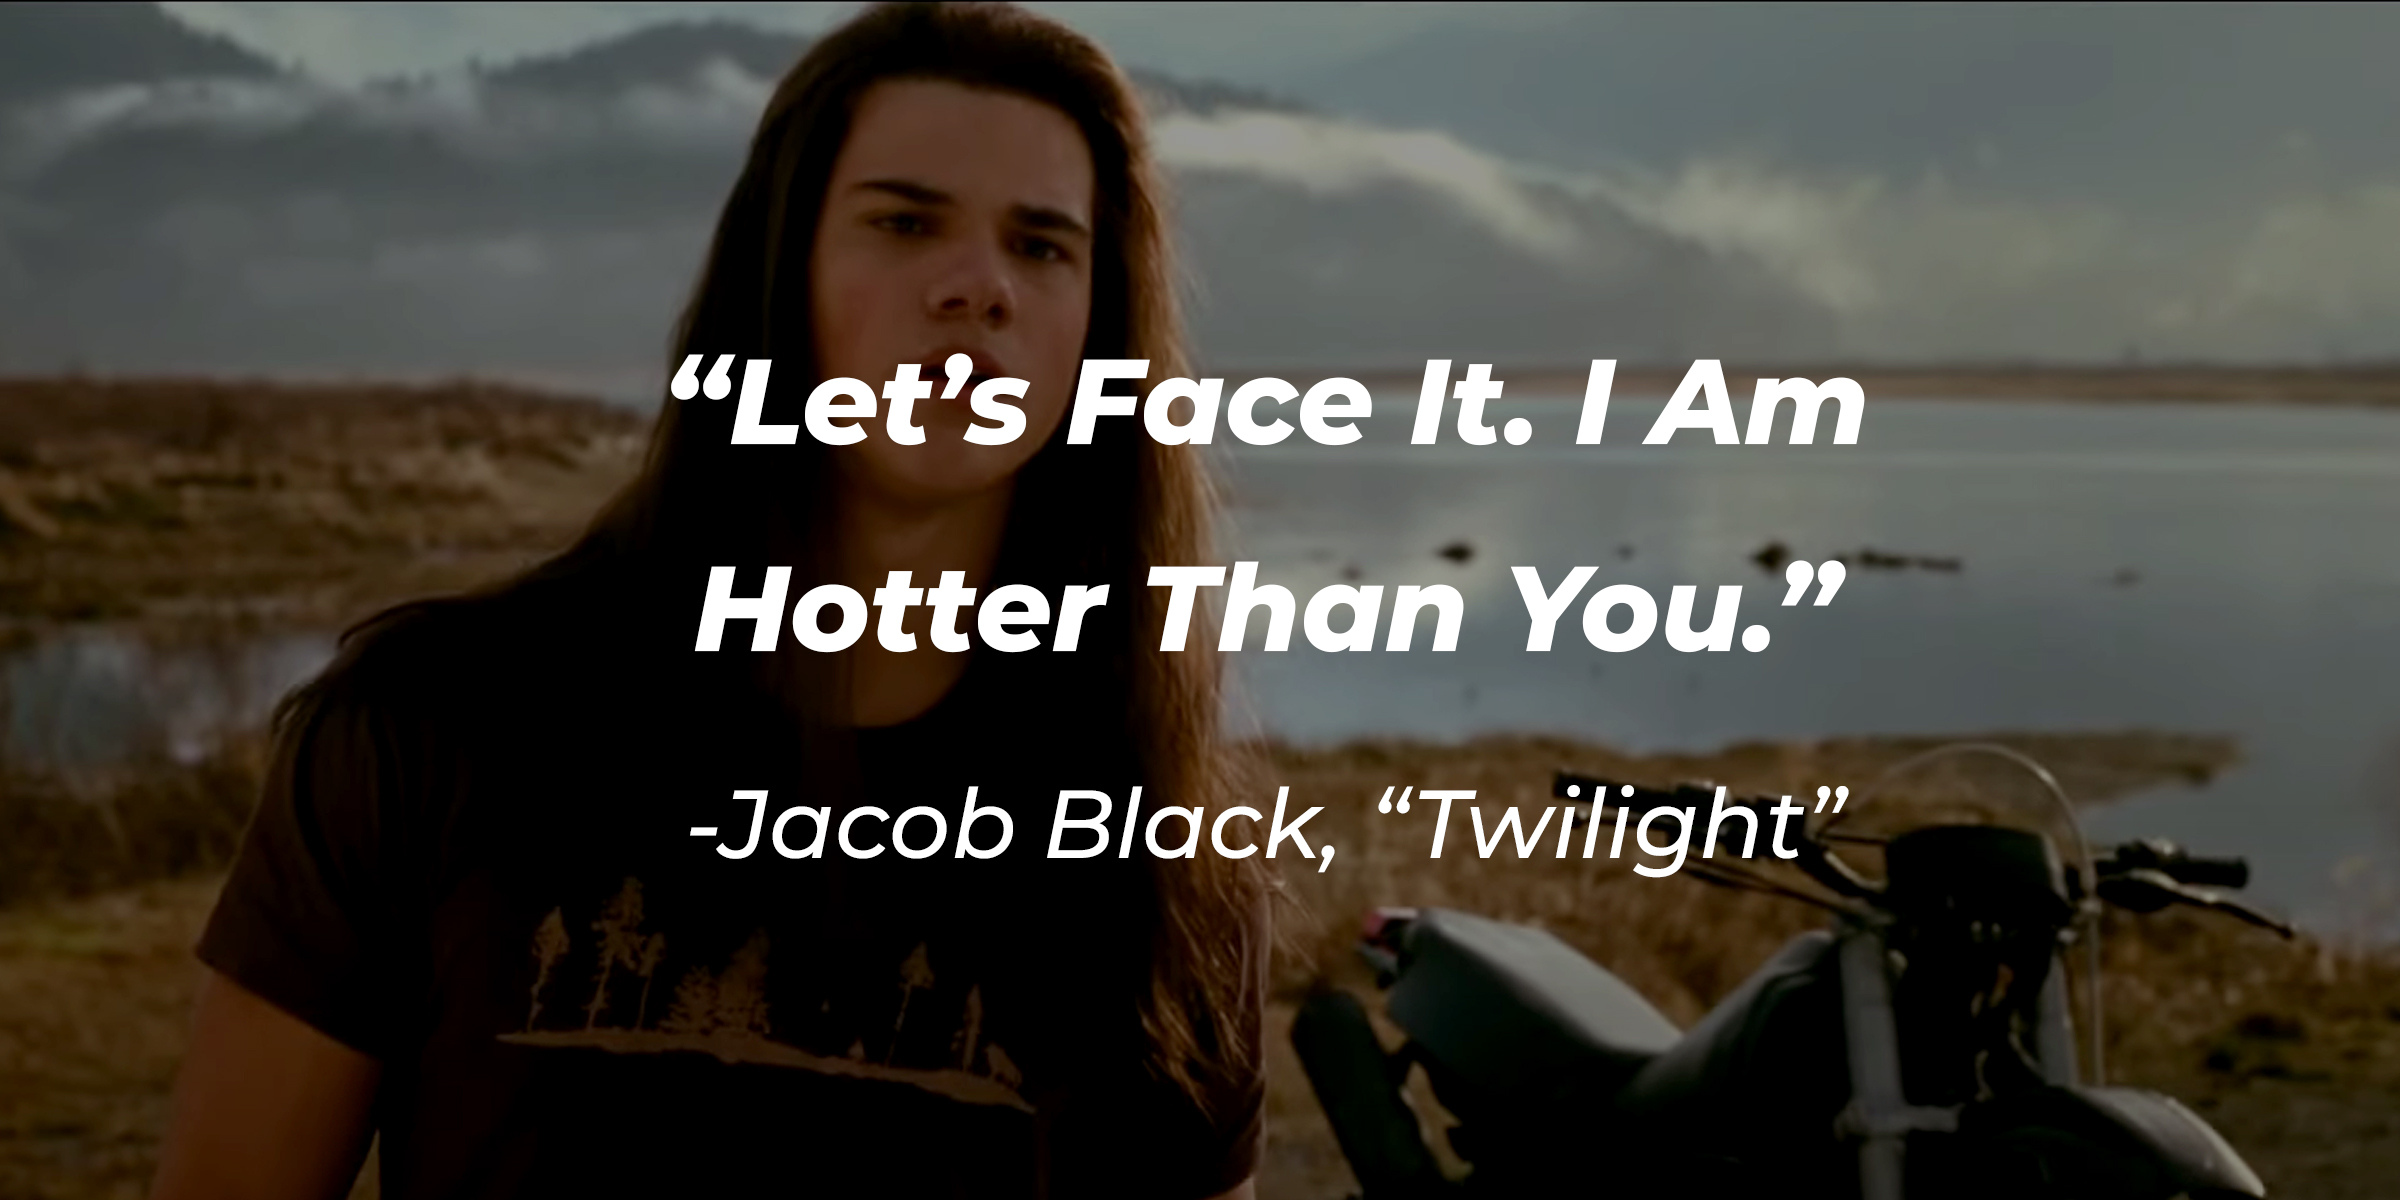 Image of Jacob Black with his quote in "Twilight," "Let's face it. I am hotter than you." | Source: Facebook.com/twilight